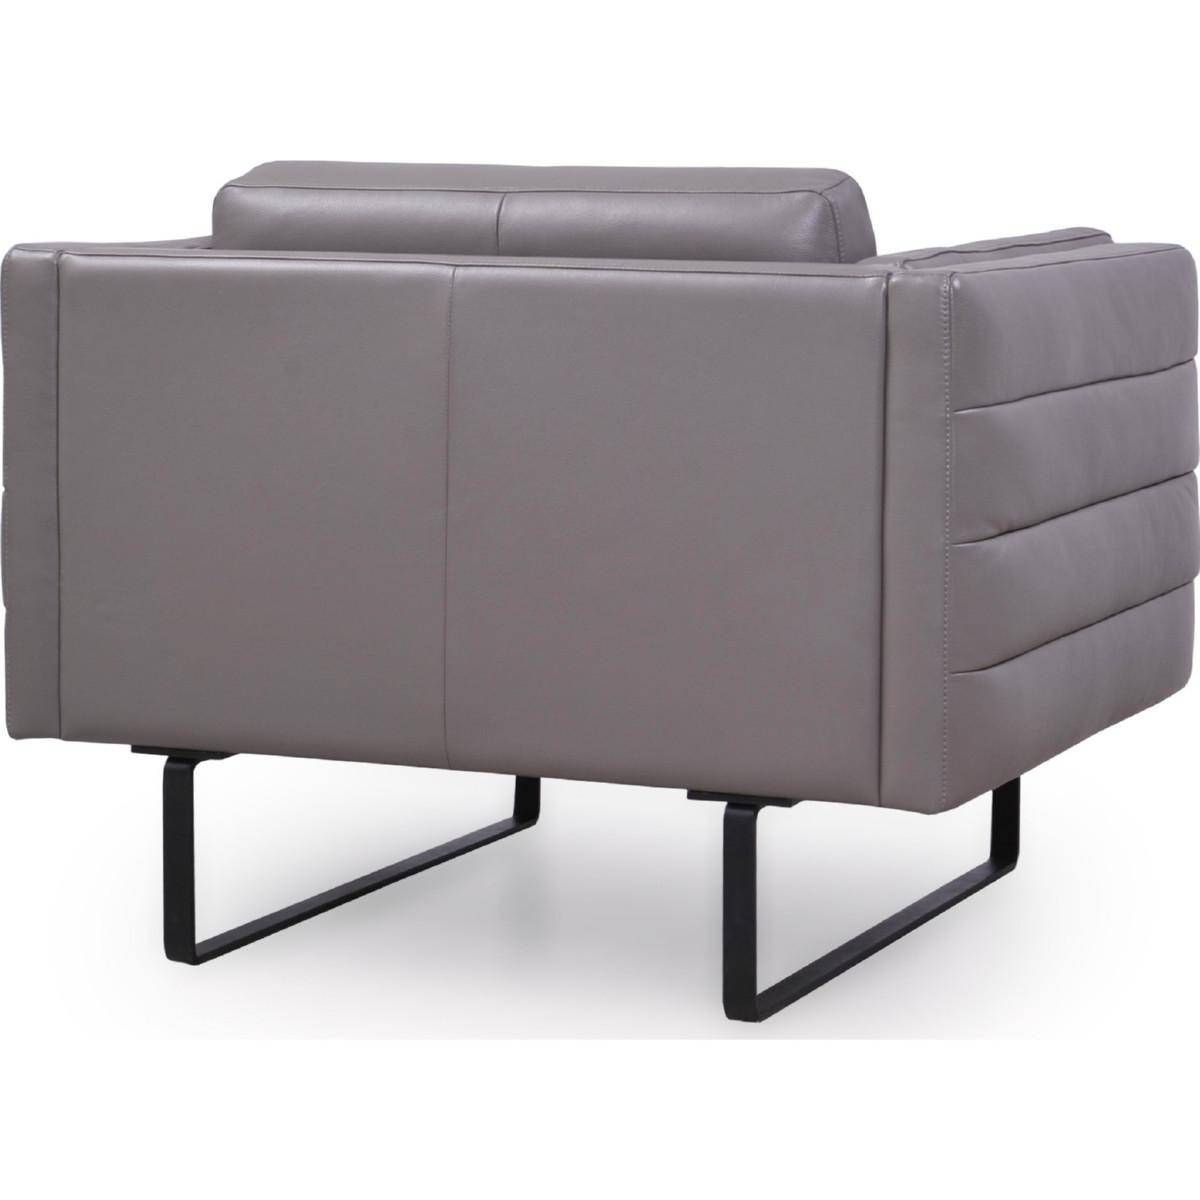 Buy Moroni Orson 582 Sofa Armchair Set 2 Pcs In Gray, Top In Orsen Tv Stands (View 8 of 15)